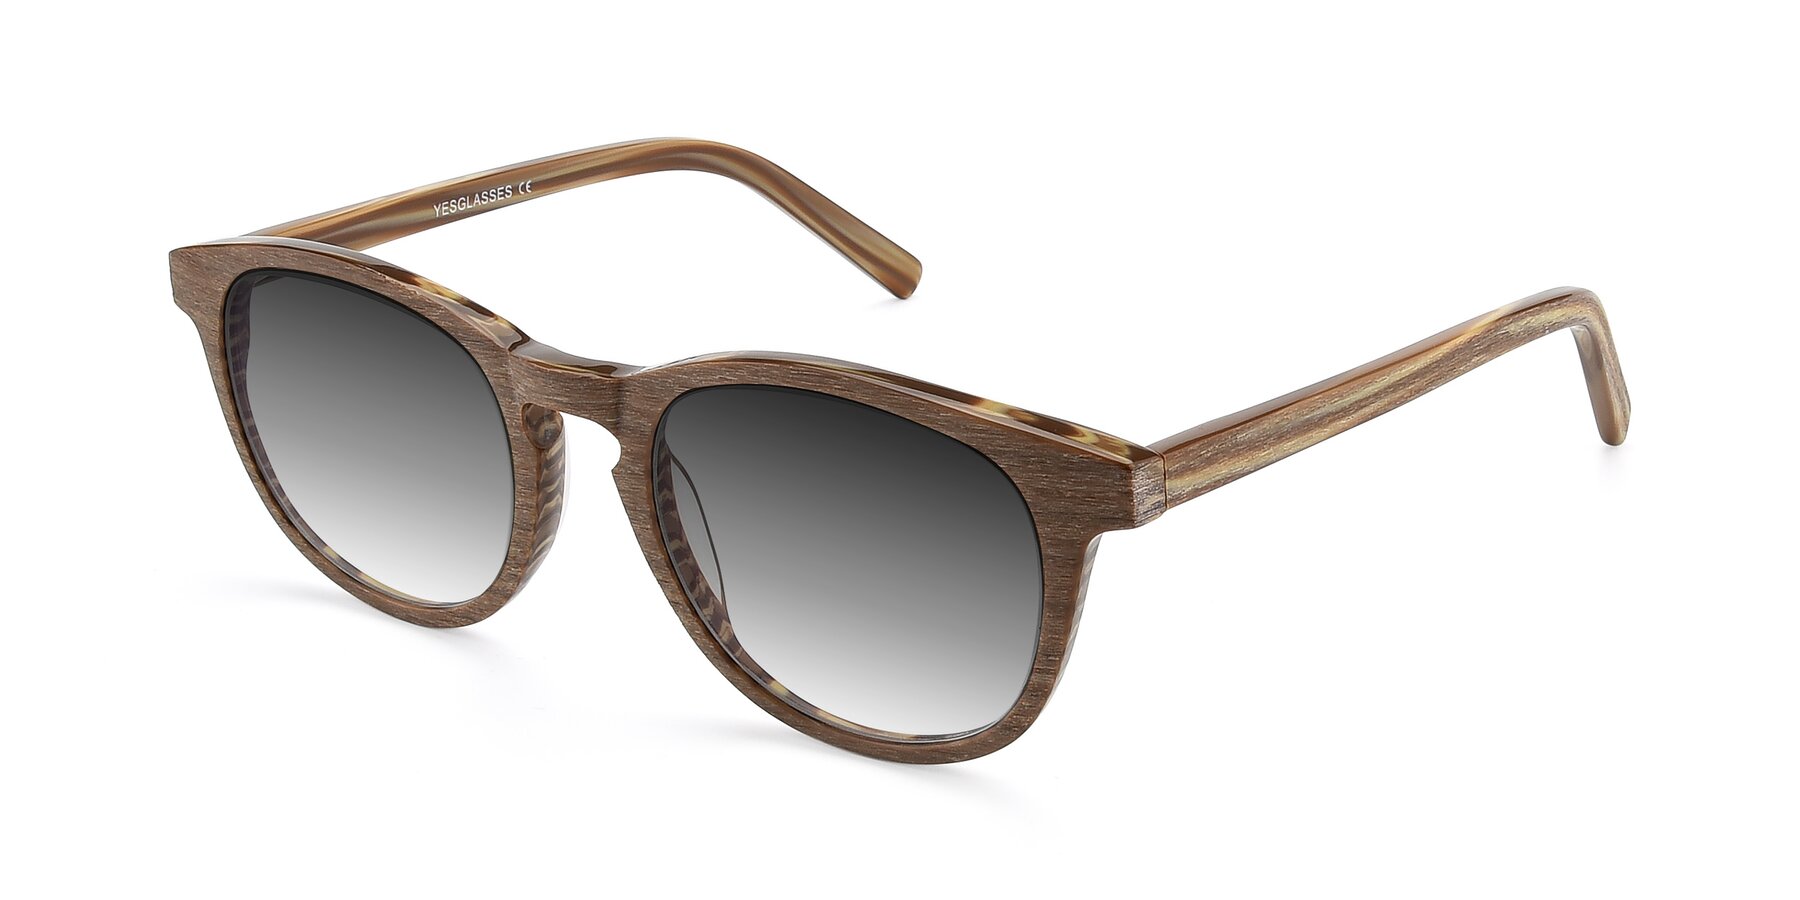 Angle of SR6044 in Brown-Wooden with Gray Gradient Lenses